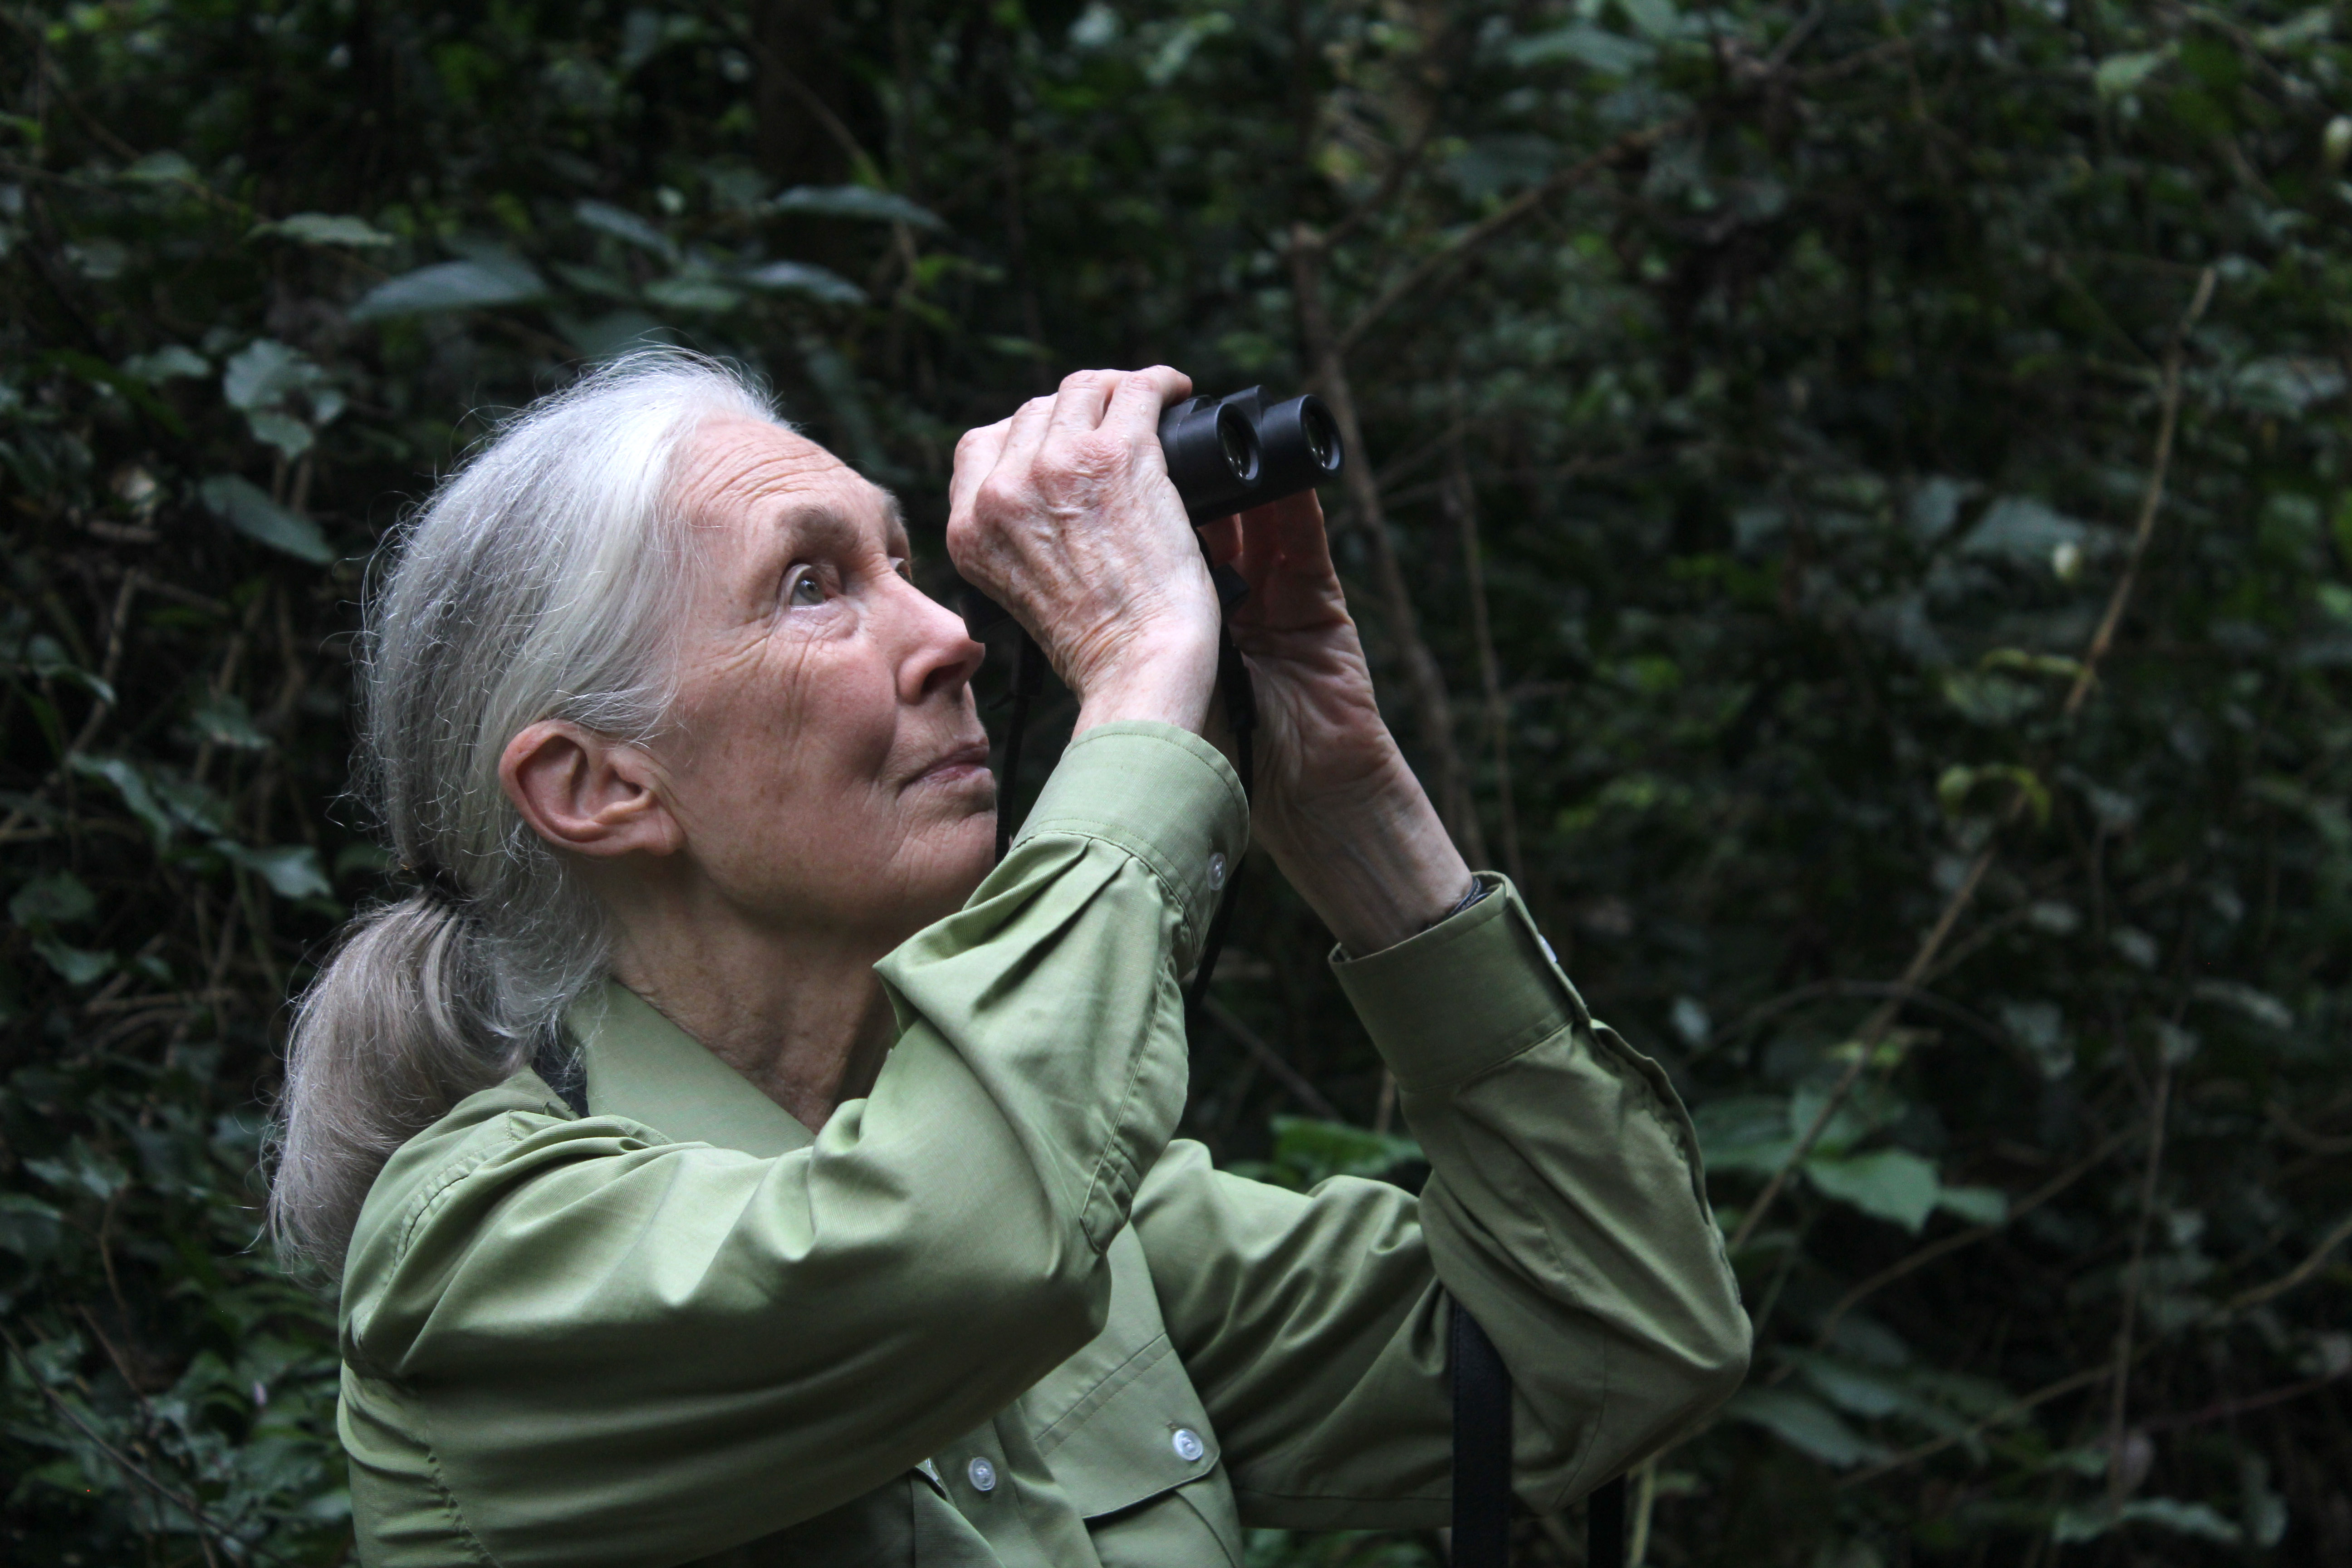 Dr. Jane Goodall looks through a pair of binoculars while in the forest.